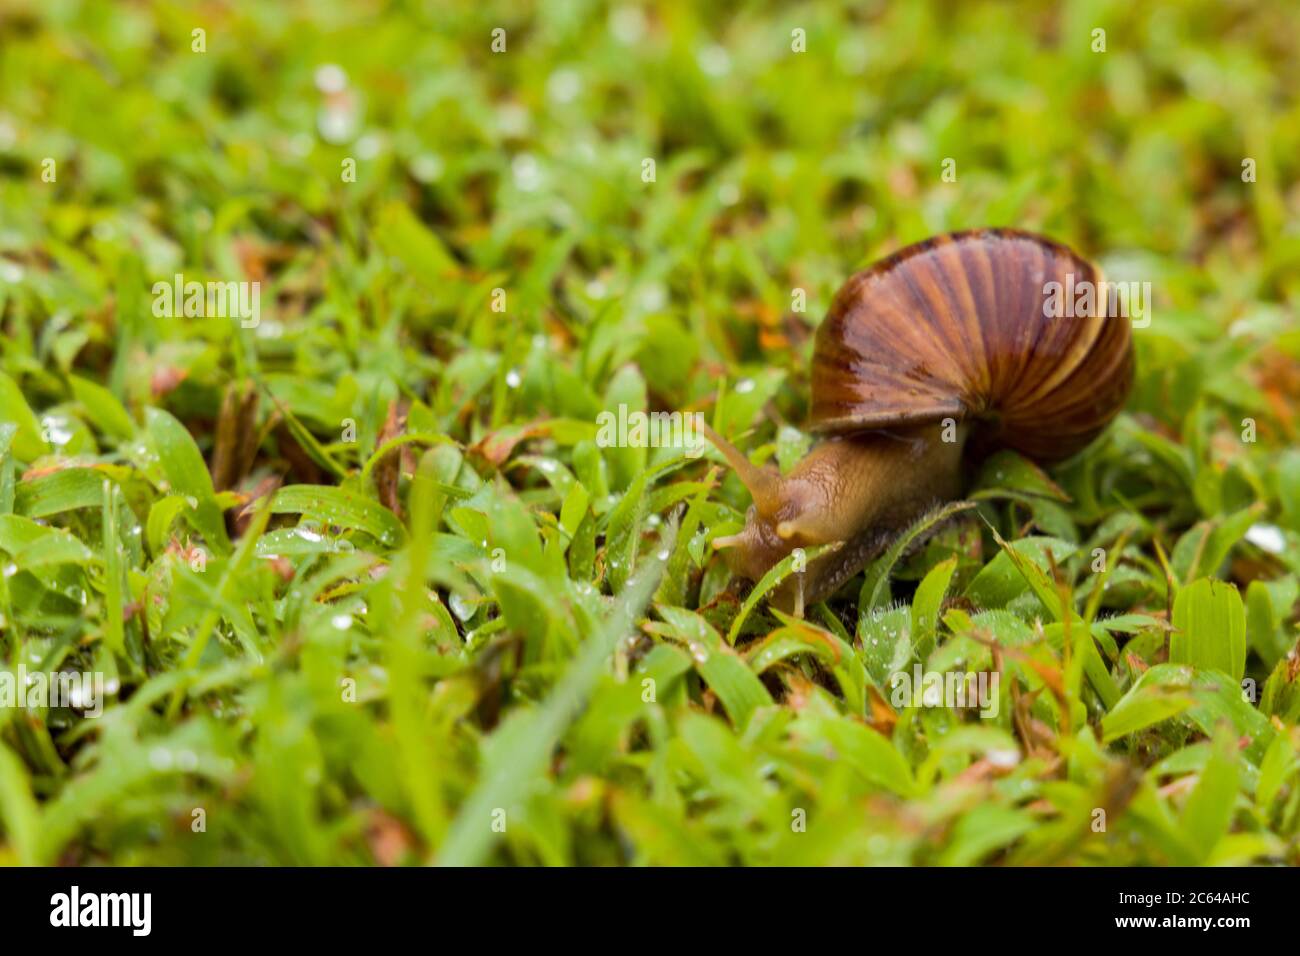 Achatina fulica is a species of large land snail that belongs in the family Achatinidae. It is also known as the African giant snail or giant African Stock Photo